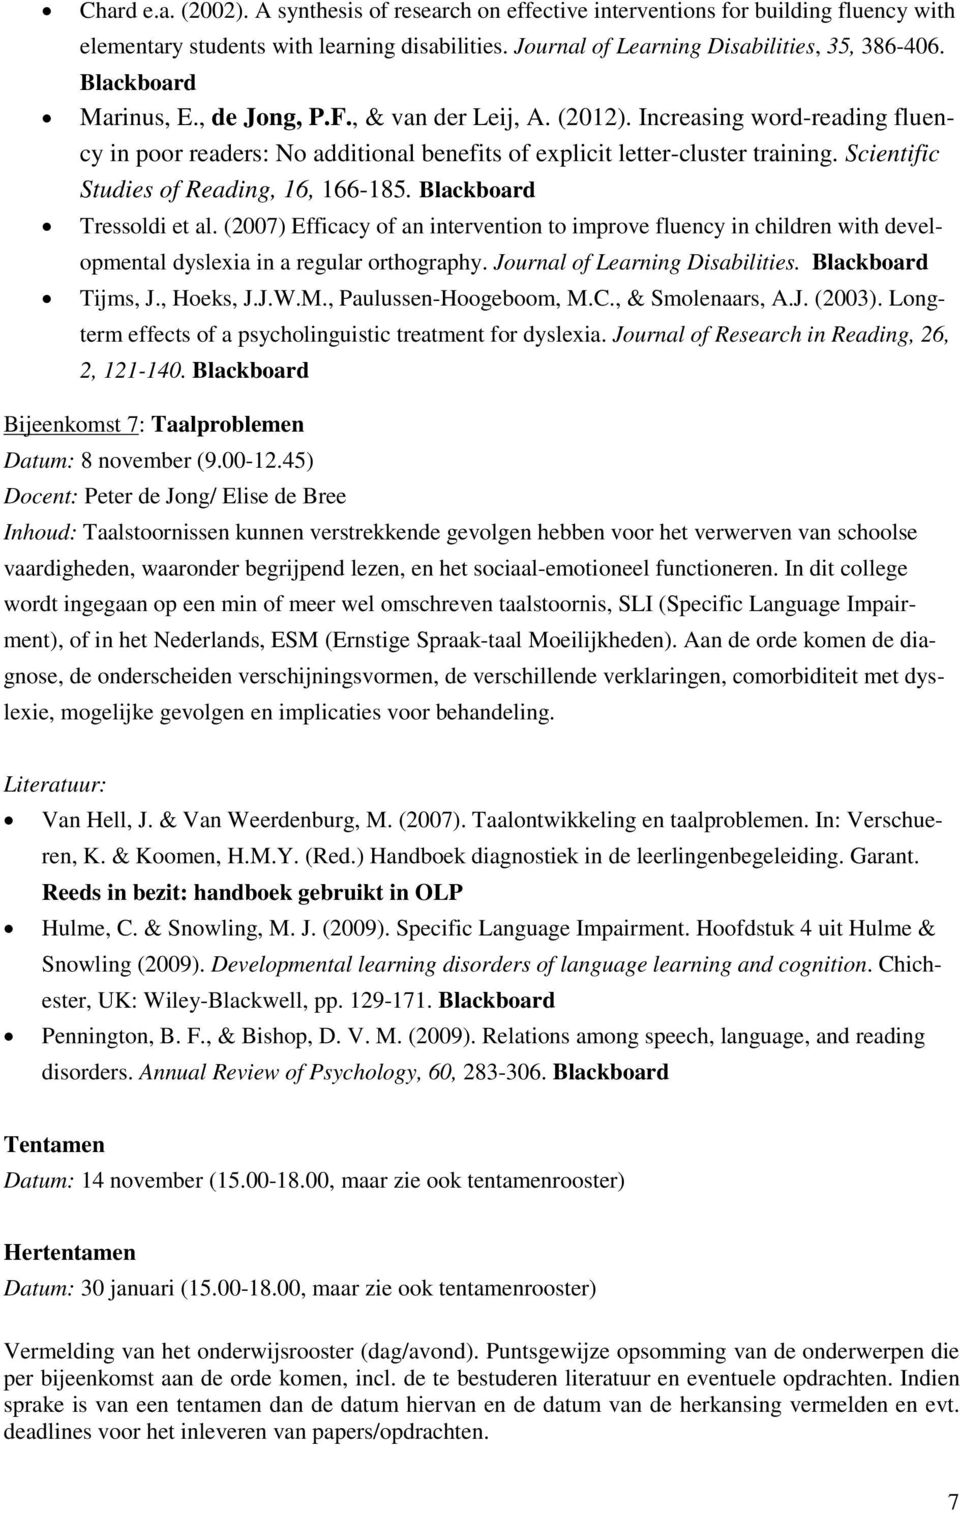 Scientific Studies of Reading, 16, 166-185. Blackboard Tressoldi et al. (2007) Efficacy of an intervention to improve fluency in children with developmental dyslexia in a regular orthography.